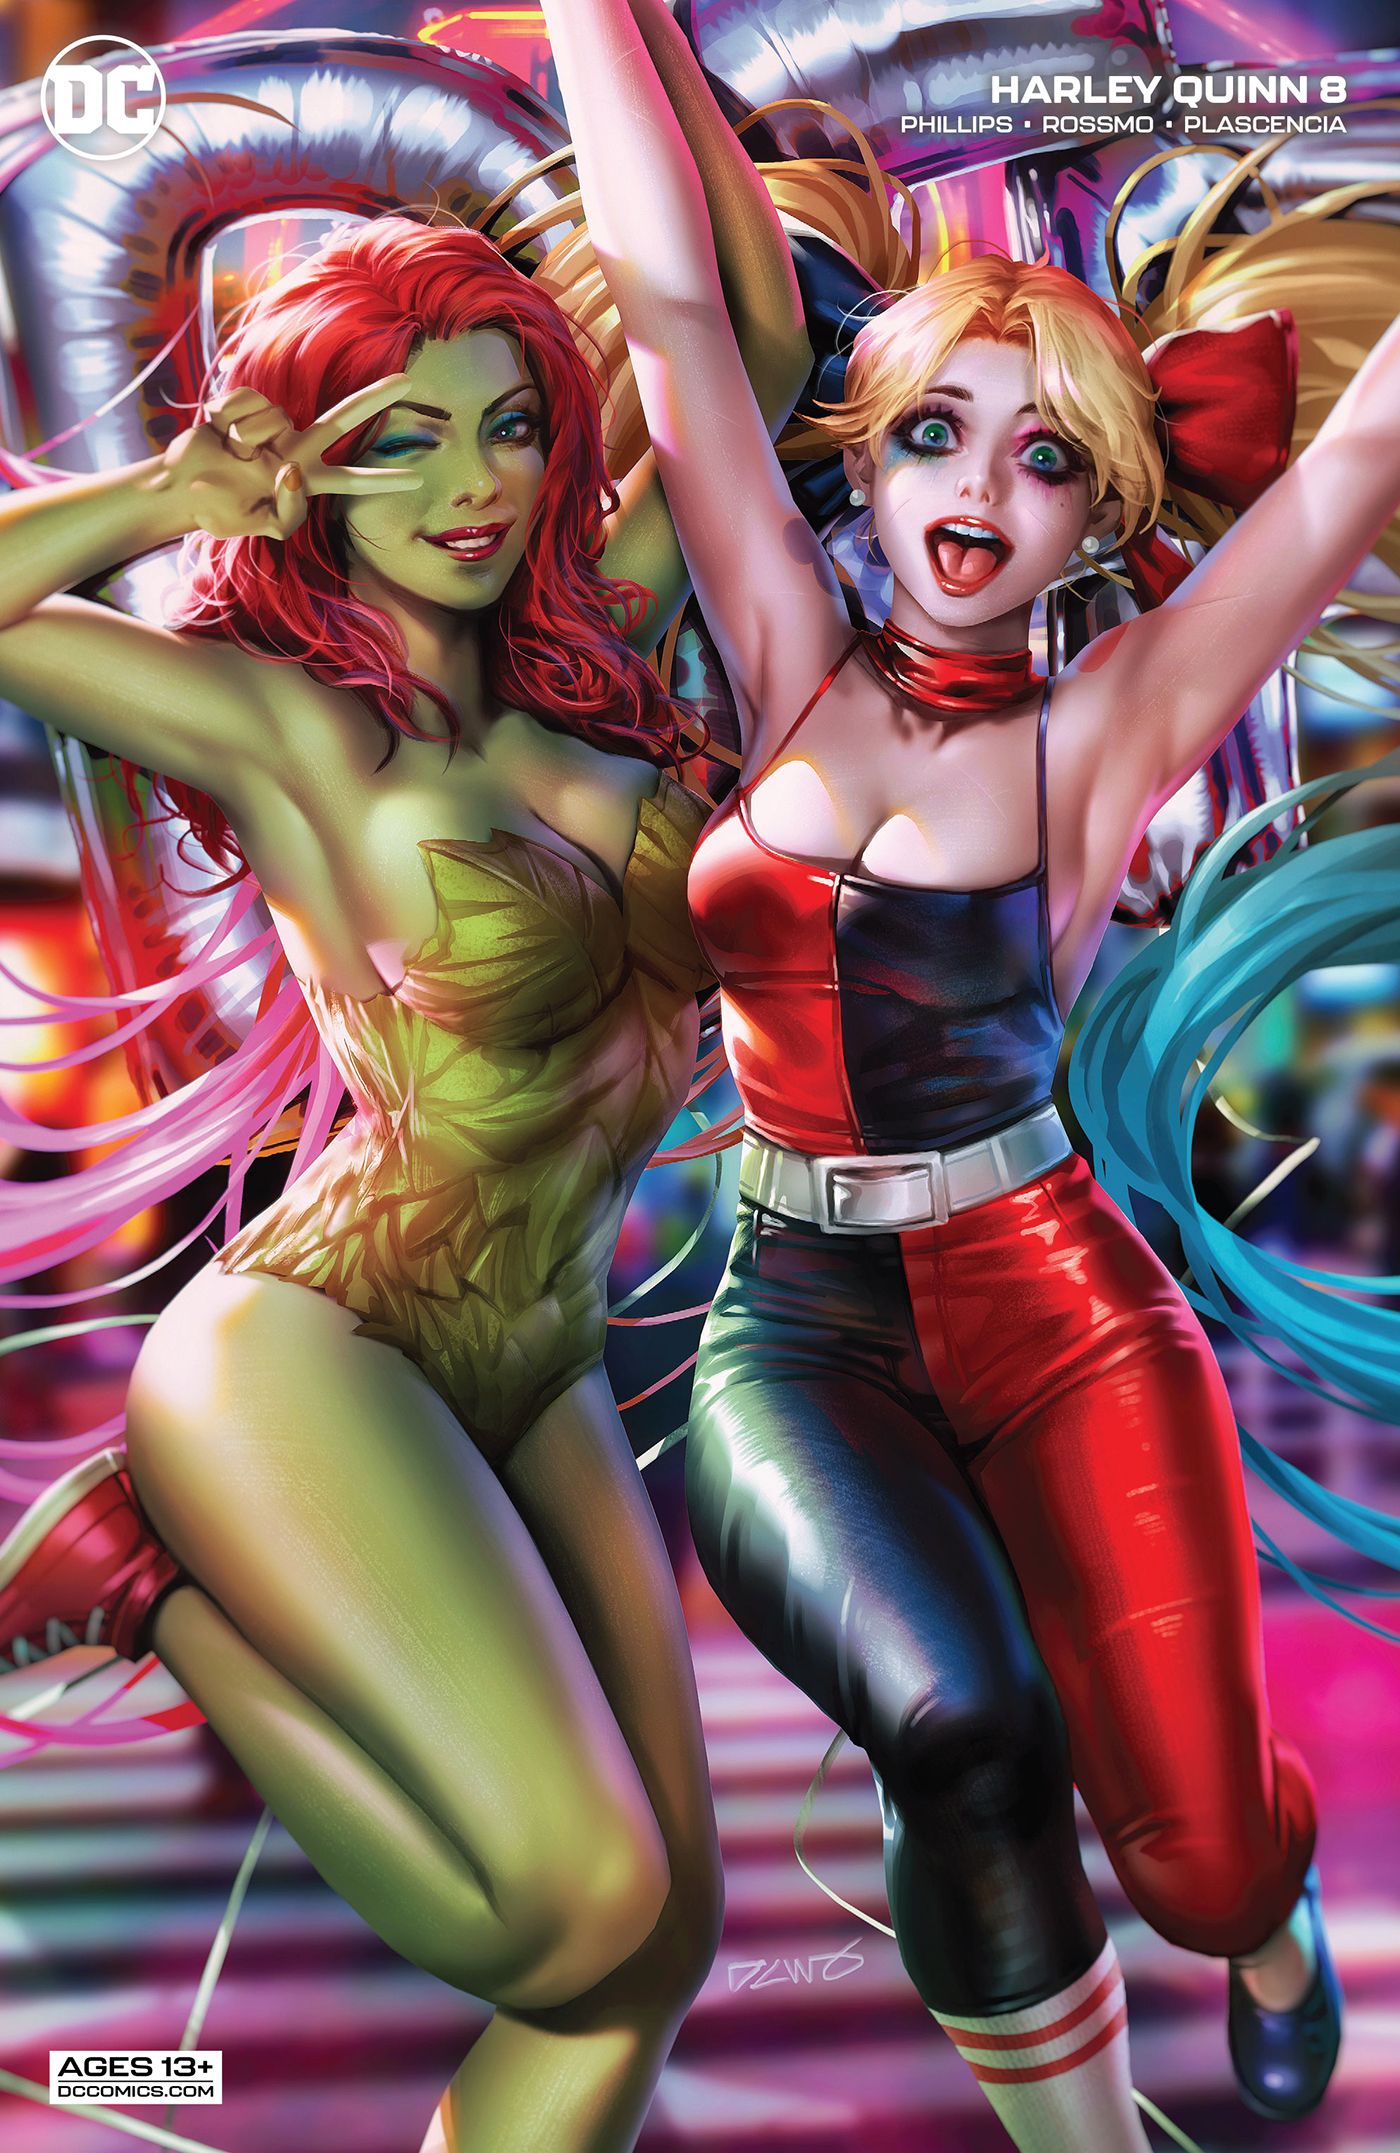 Harley Quinn and Poison Ivy grace a variant cover for Harley Quinn #8.